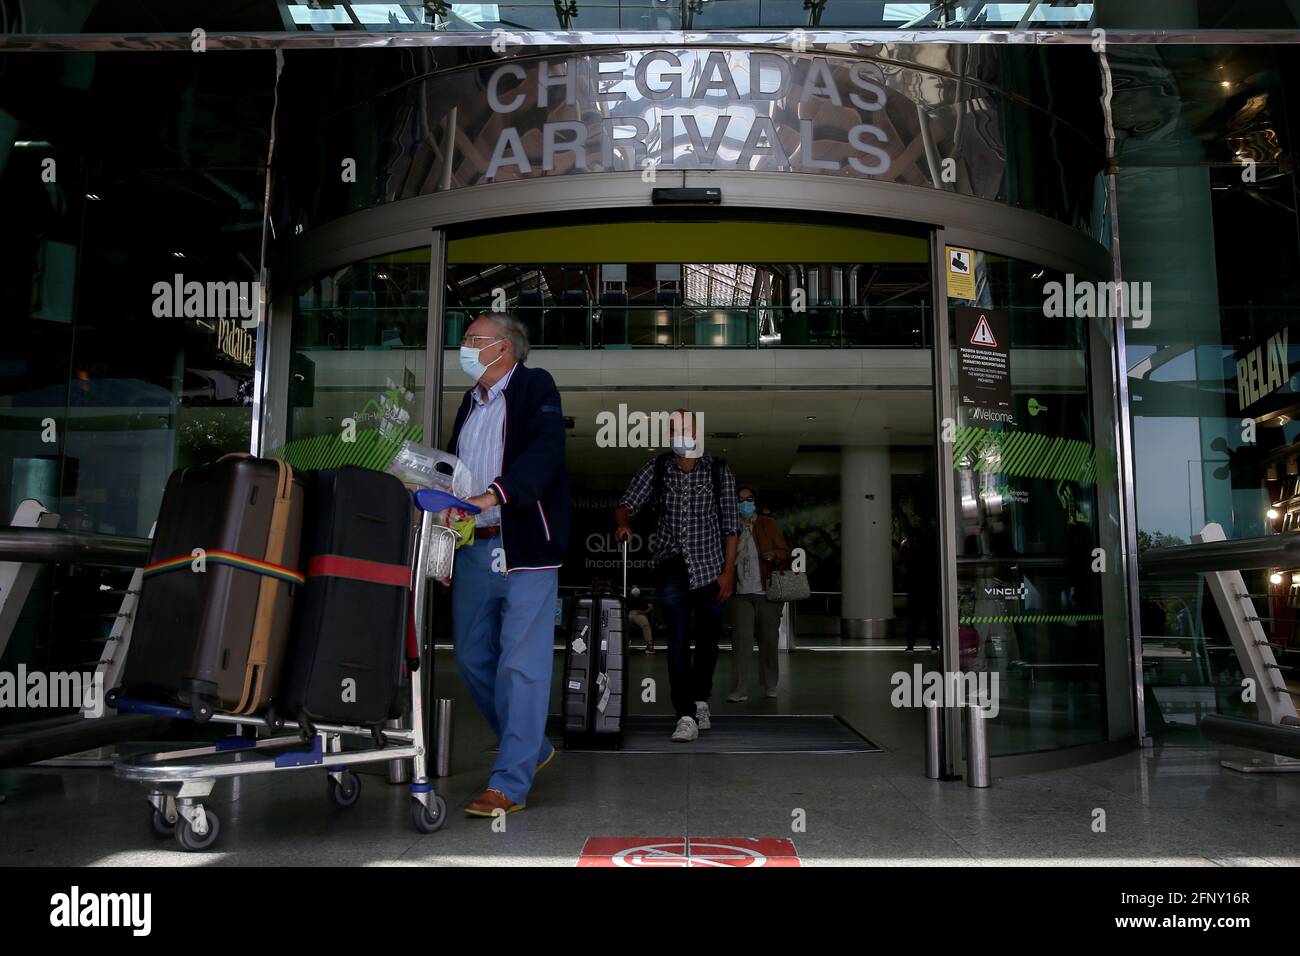 Lisbon. 19th May, 2021. Passengers arrive at Lisbon airport in Portugal on May 19, 2021. British vacationers began arriving in large numbers in Portugal after governments of the two countries eased their COVID-19 pandemic travel restrictions. Credit: Pedro Fiuza/Xinhua/Alamy Live News Stock Photo